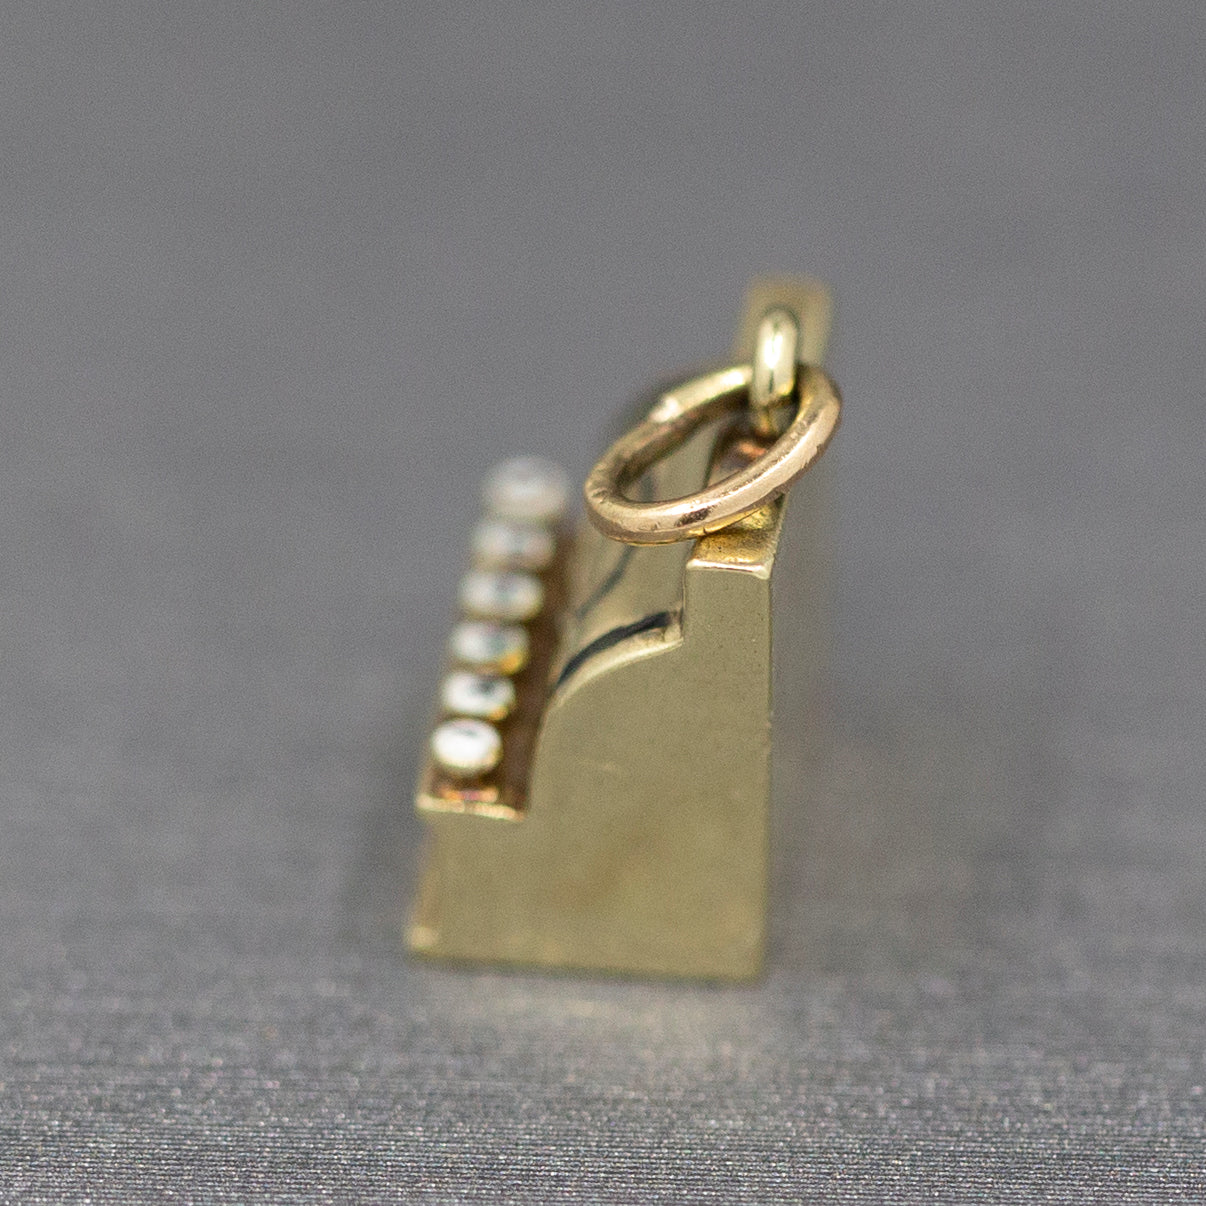 Vintage Sloan and Co Old Fashioned Enameled Cash Register Charm in 14k Yellow Gold